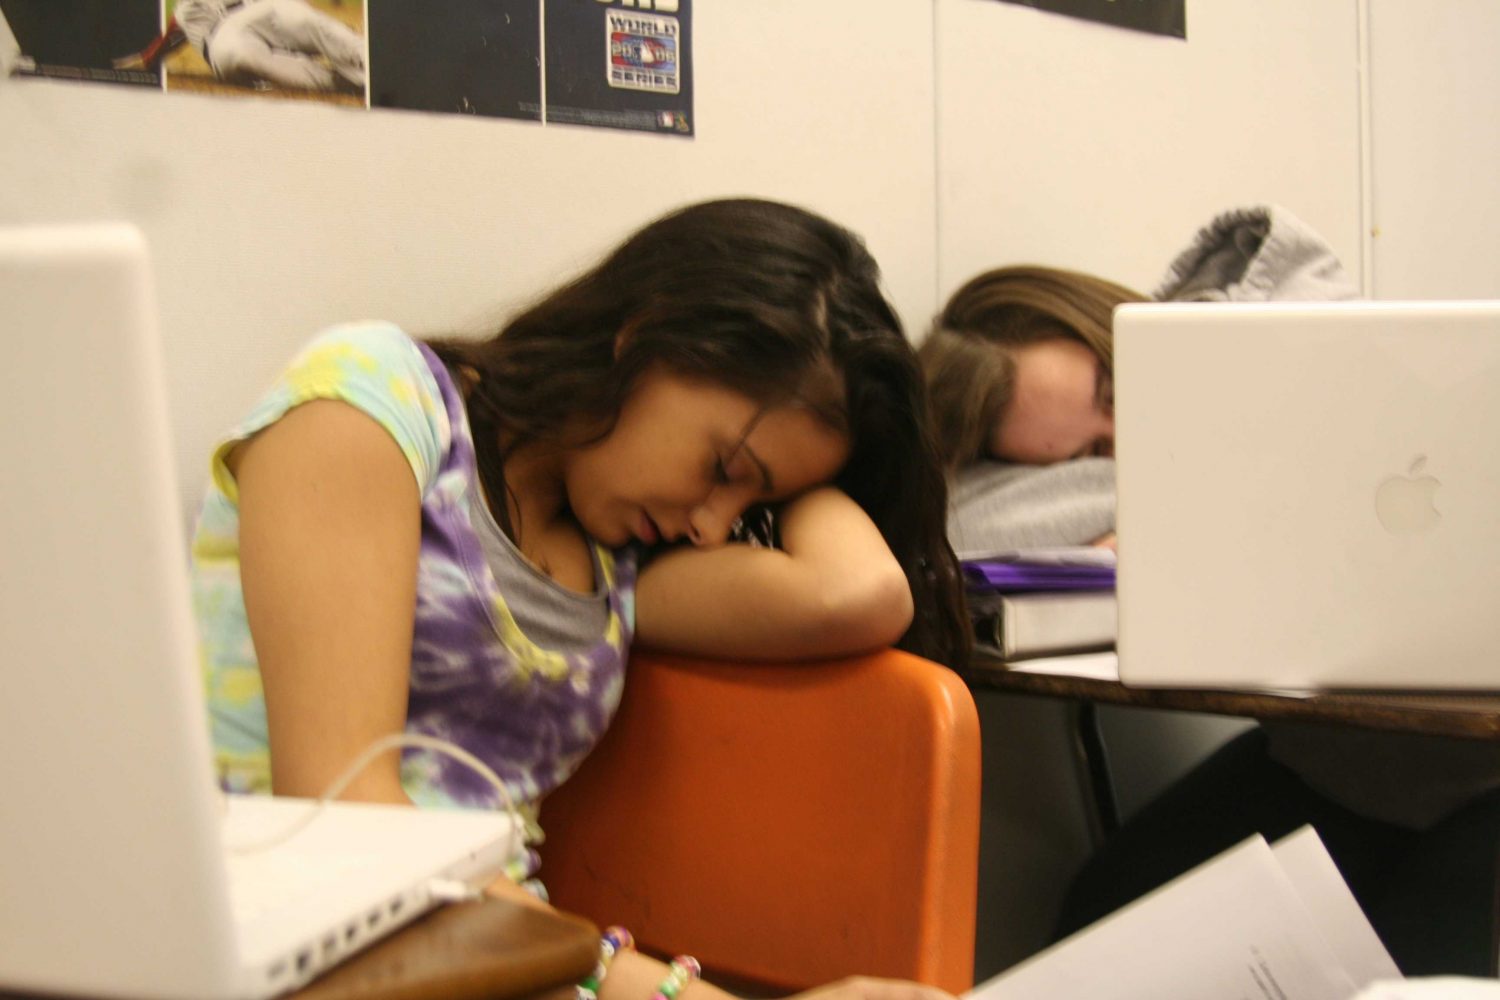 Senior Stephanie Dixon sleeps in one of her classes during free time.